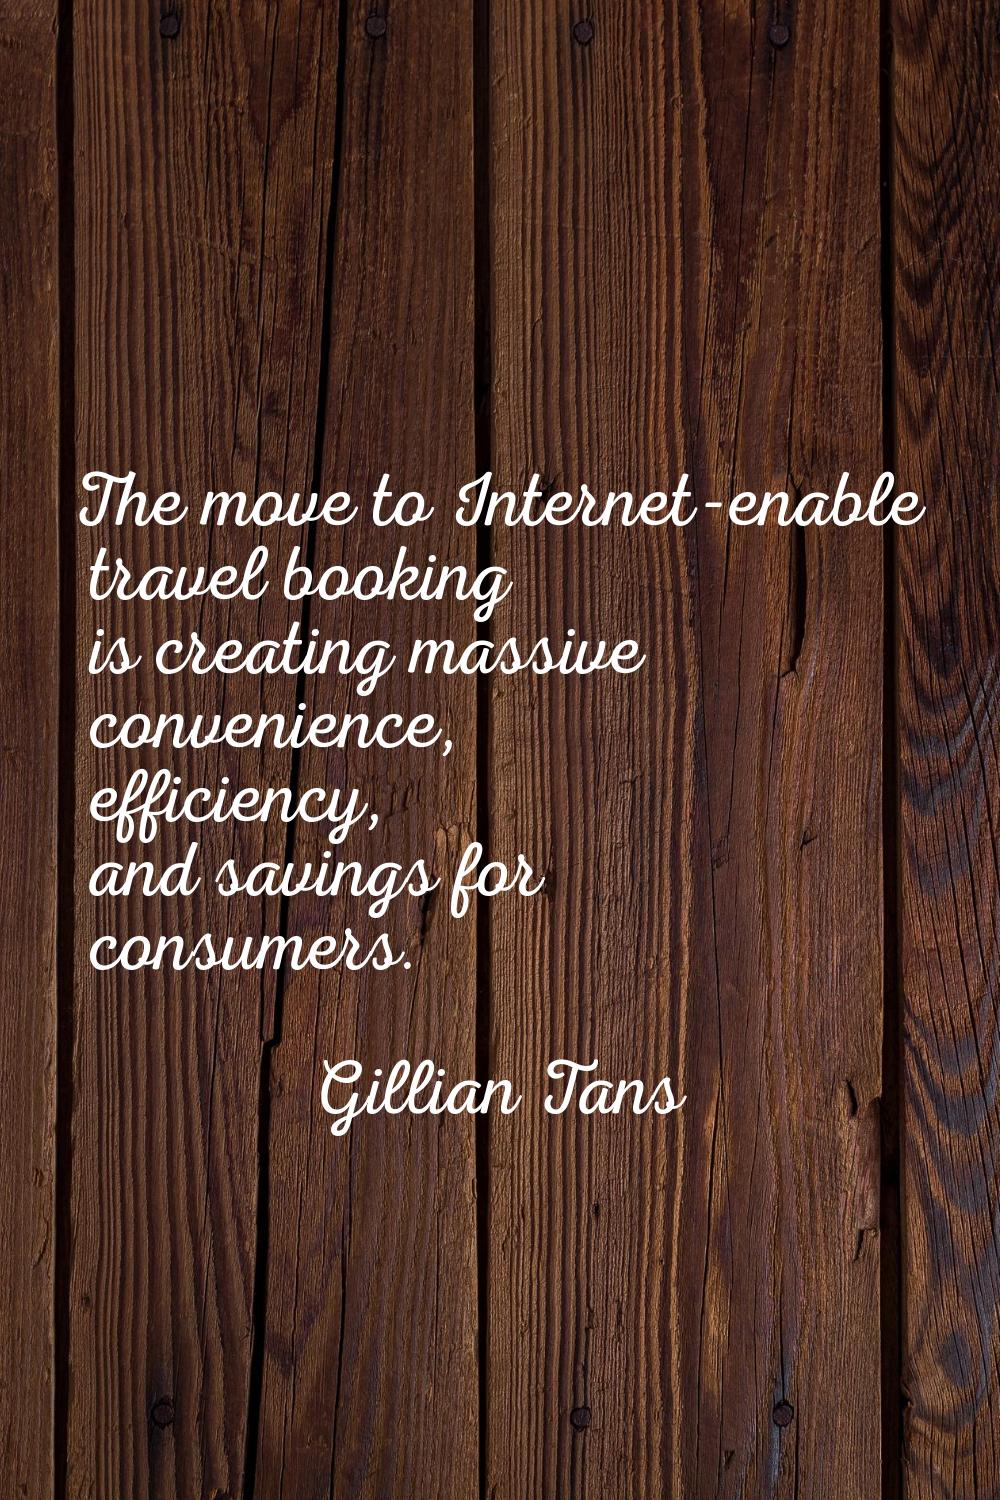 The move to Internet-enable travel booking is creating massive convenience, efficiency, and savings